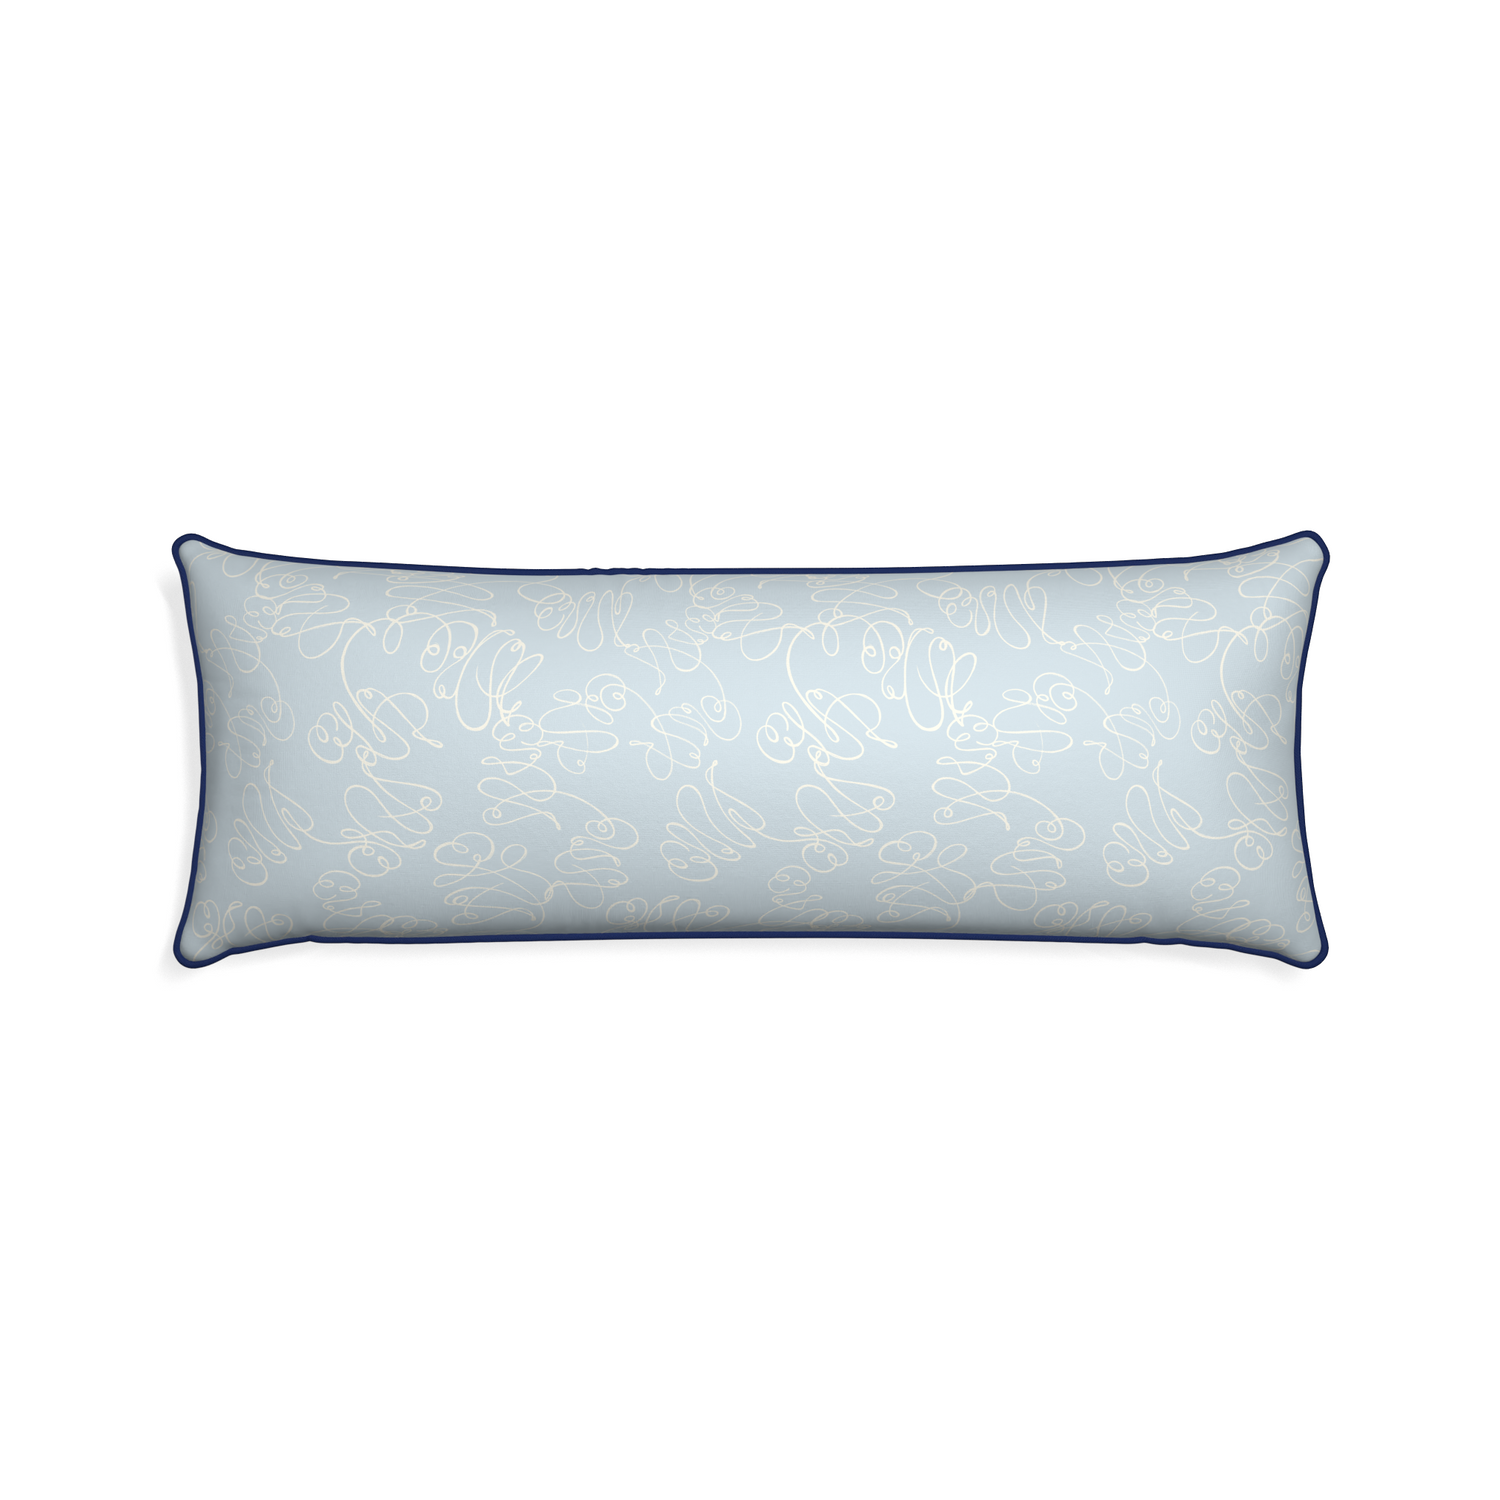 Xl-lumbar mirabella custom powder blue abstractpillow with midnight piping on white background